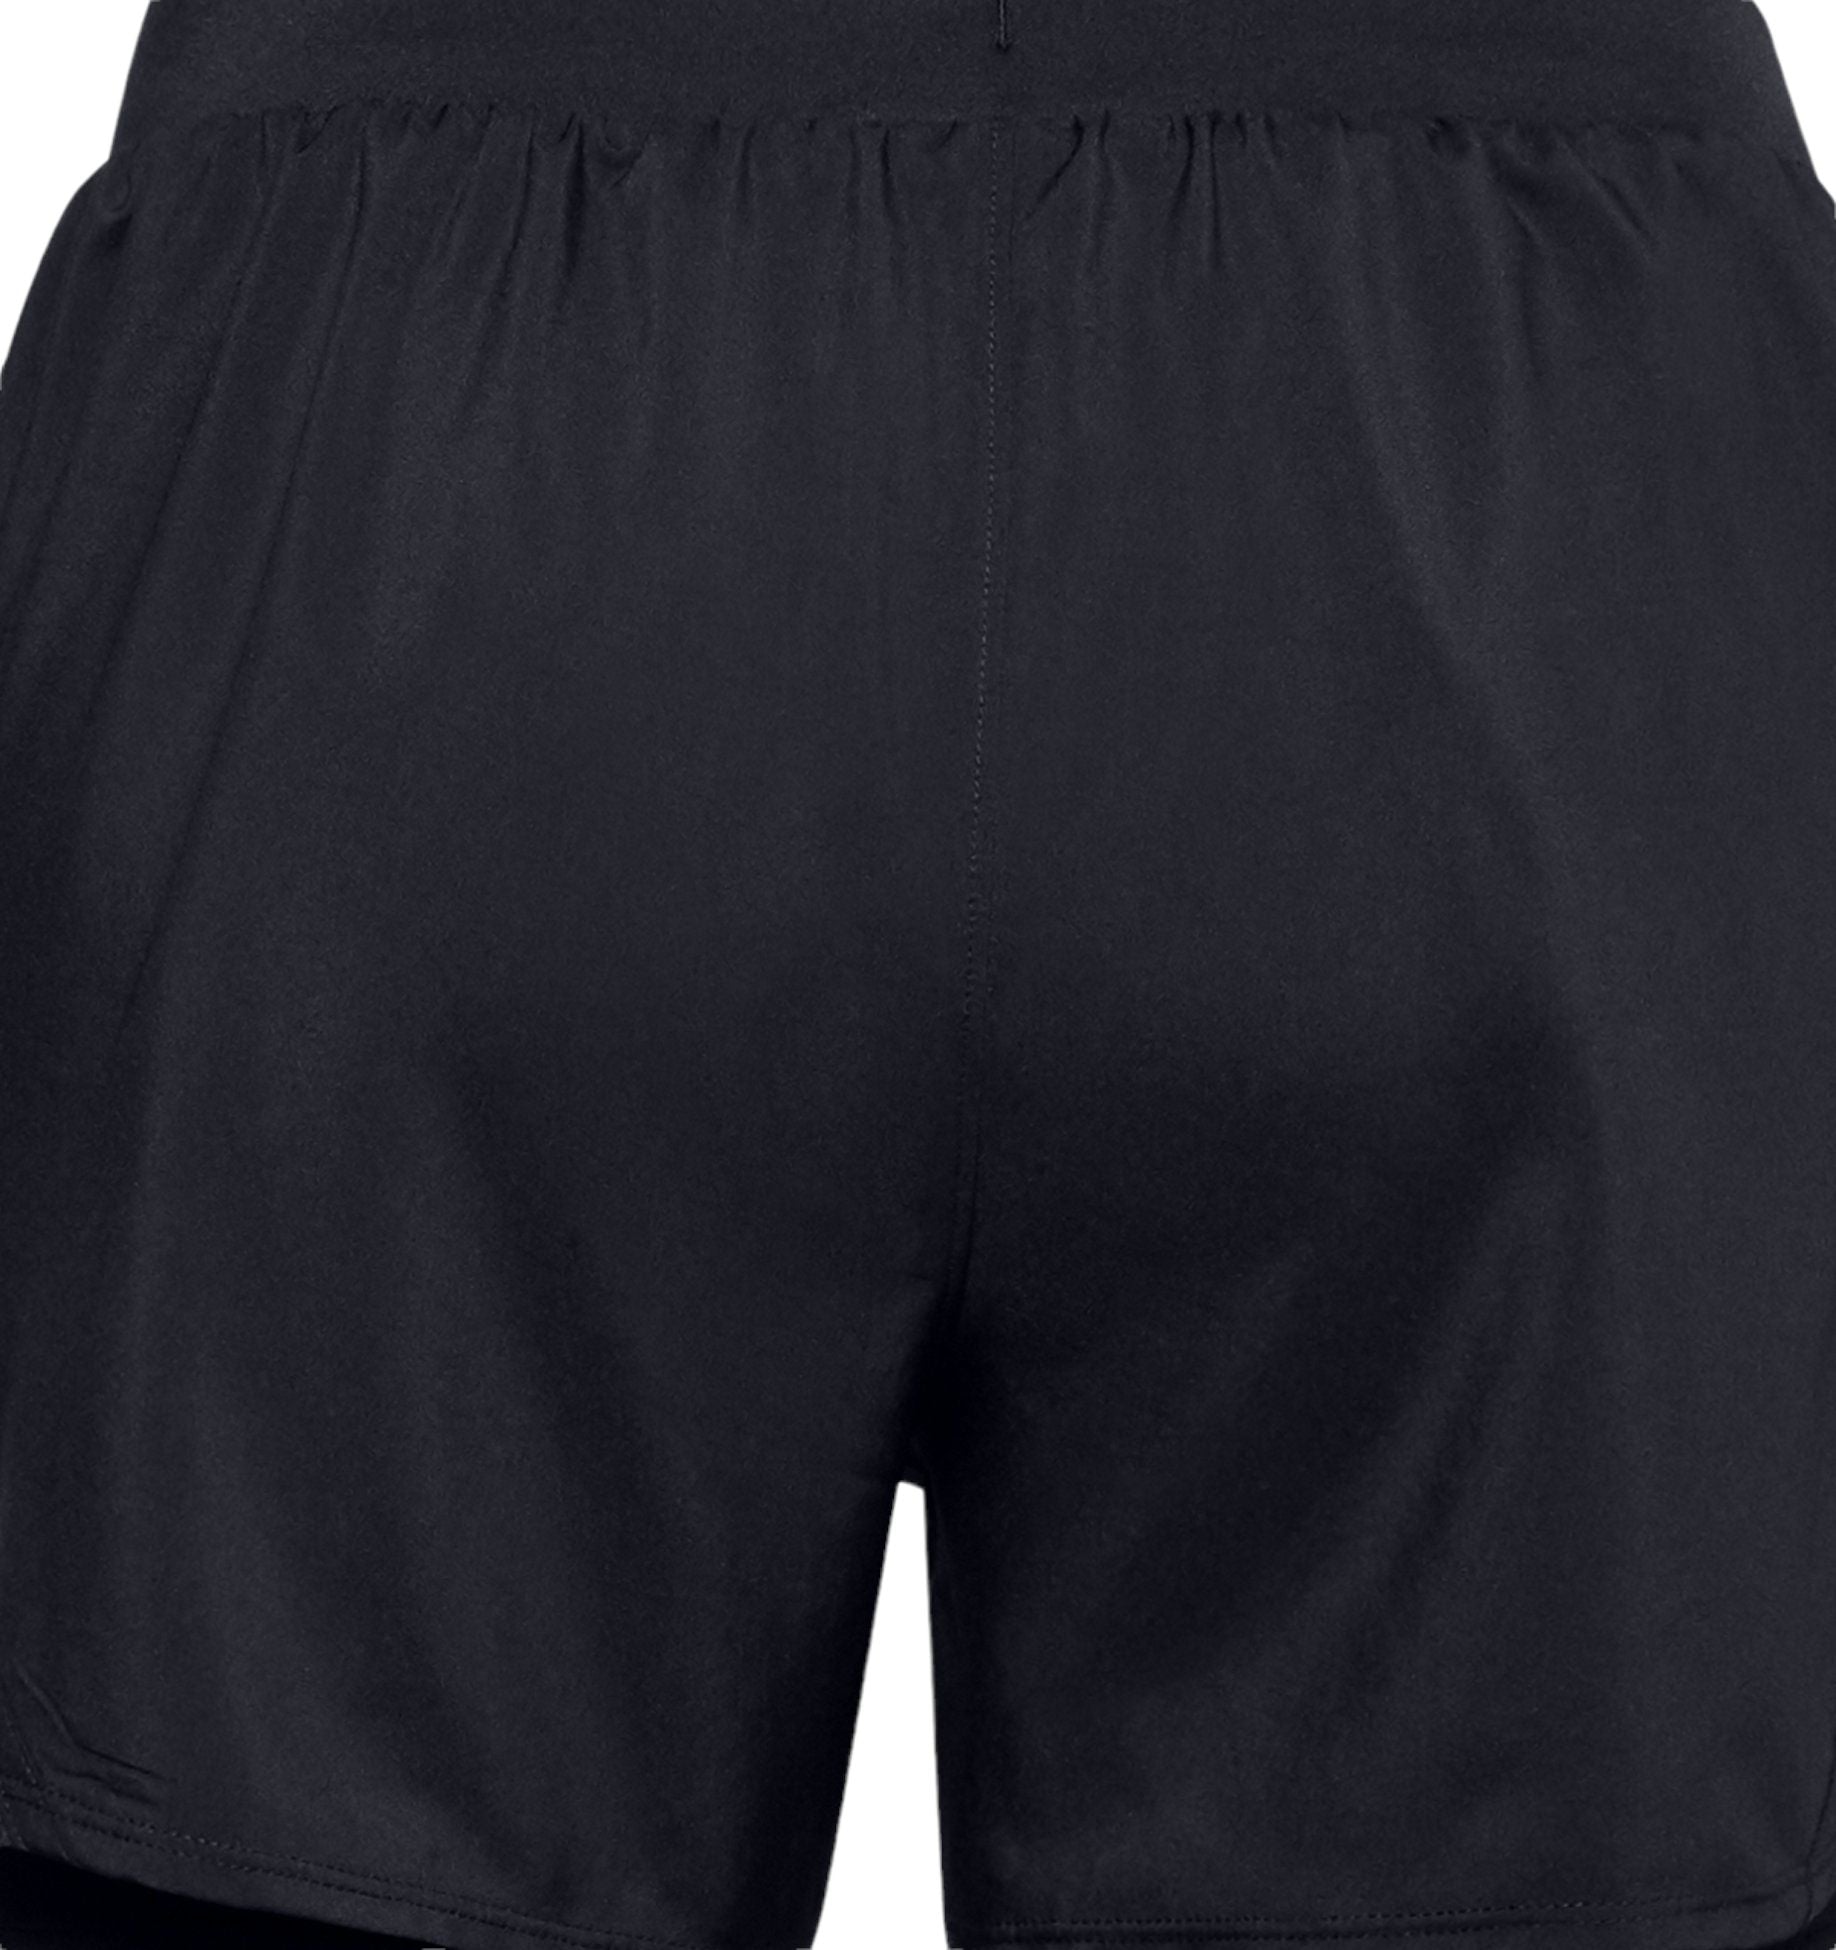 Pantaloncini Fly-By 2.0 2-in-1 Donna Black/Reflective